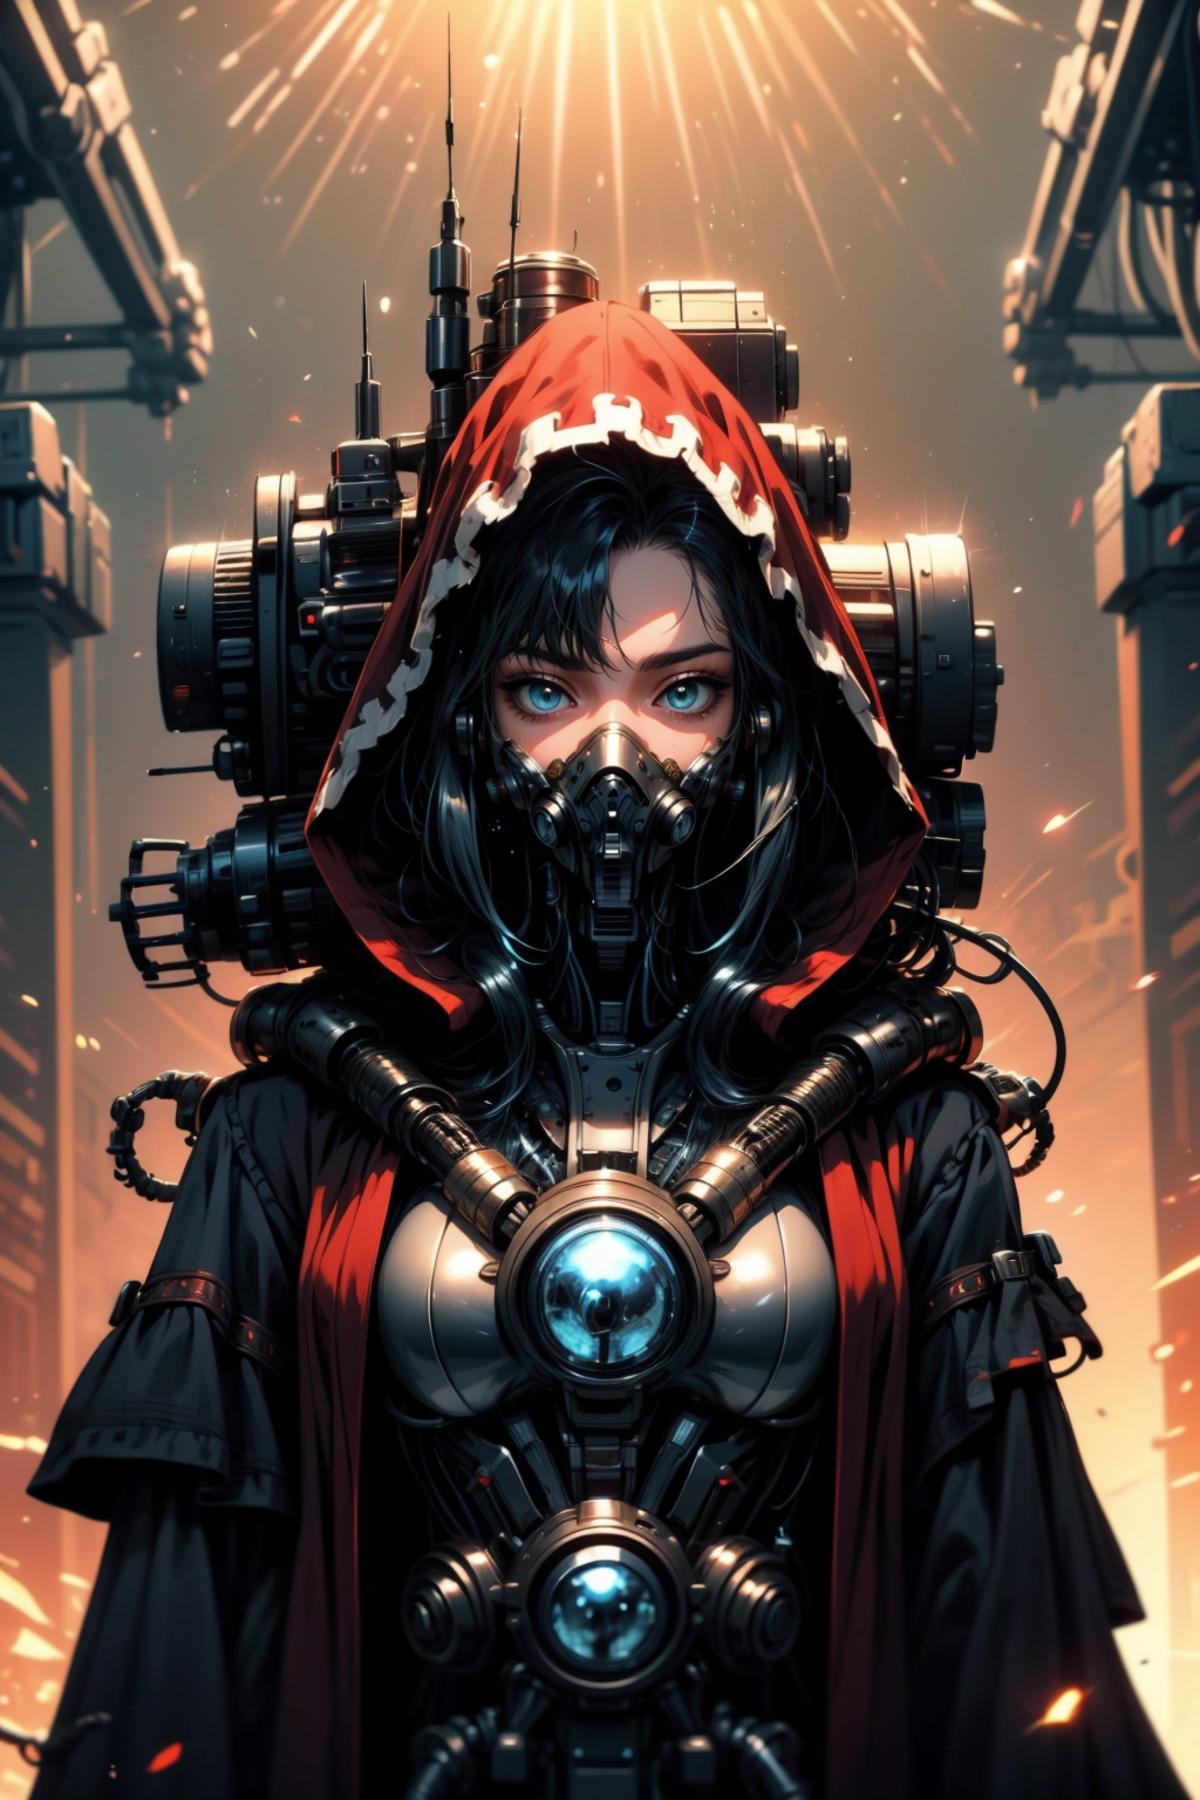 A woman in a red hood wearing a gas mask and robotic parts as a costume.